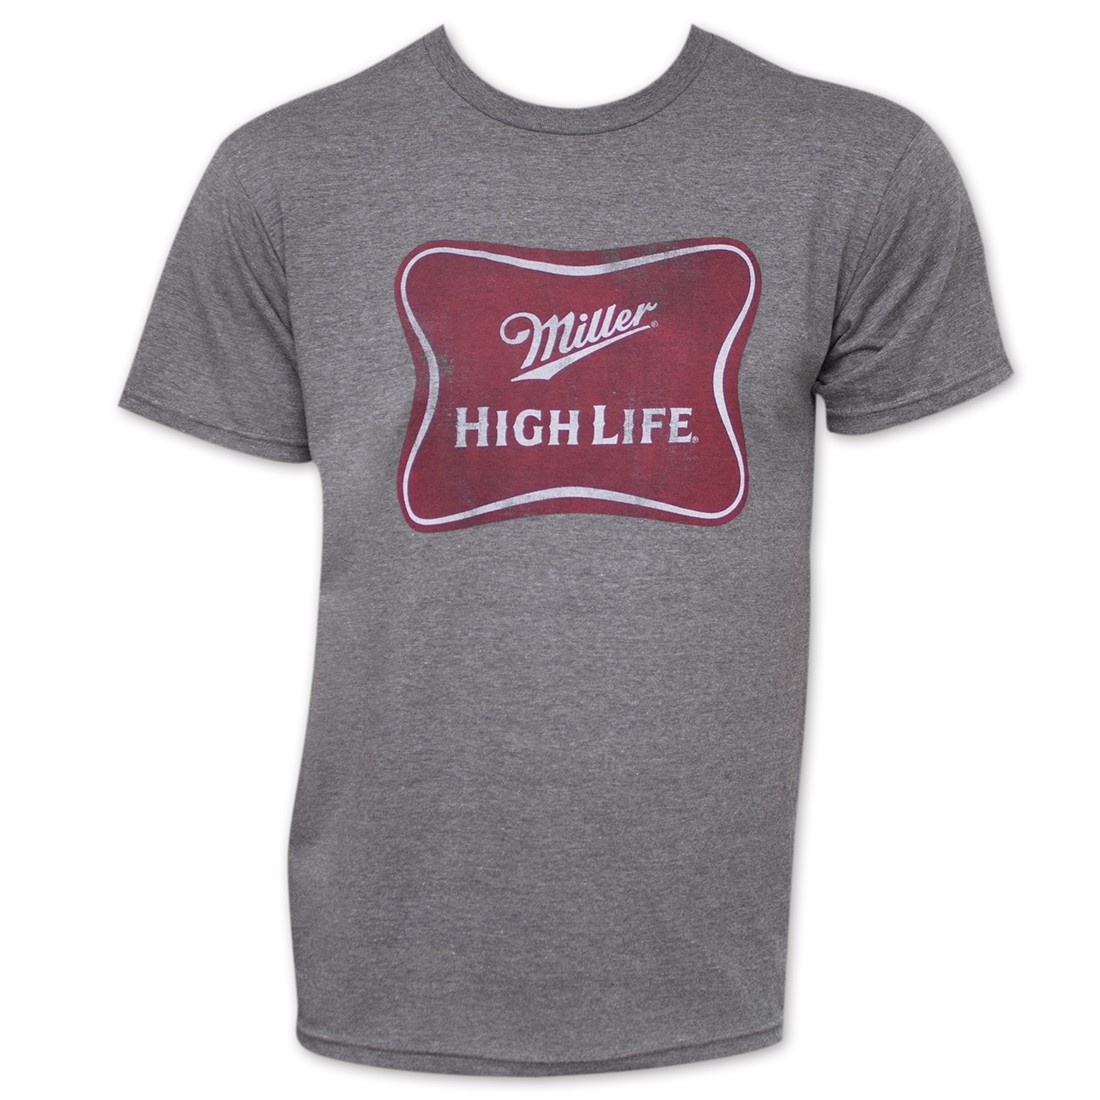 Hi is life. Target Highlife футболка. We are Millers buy.